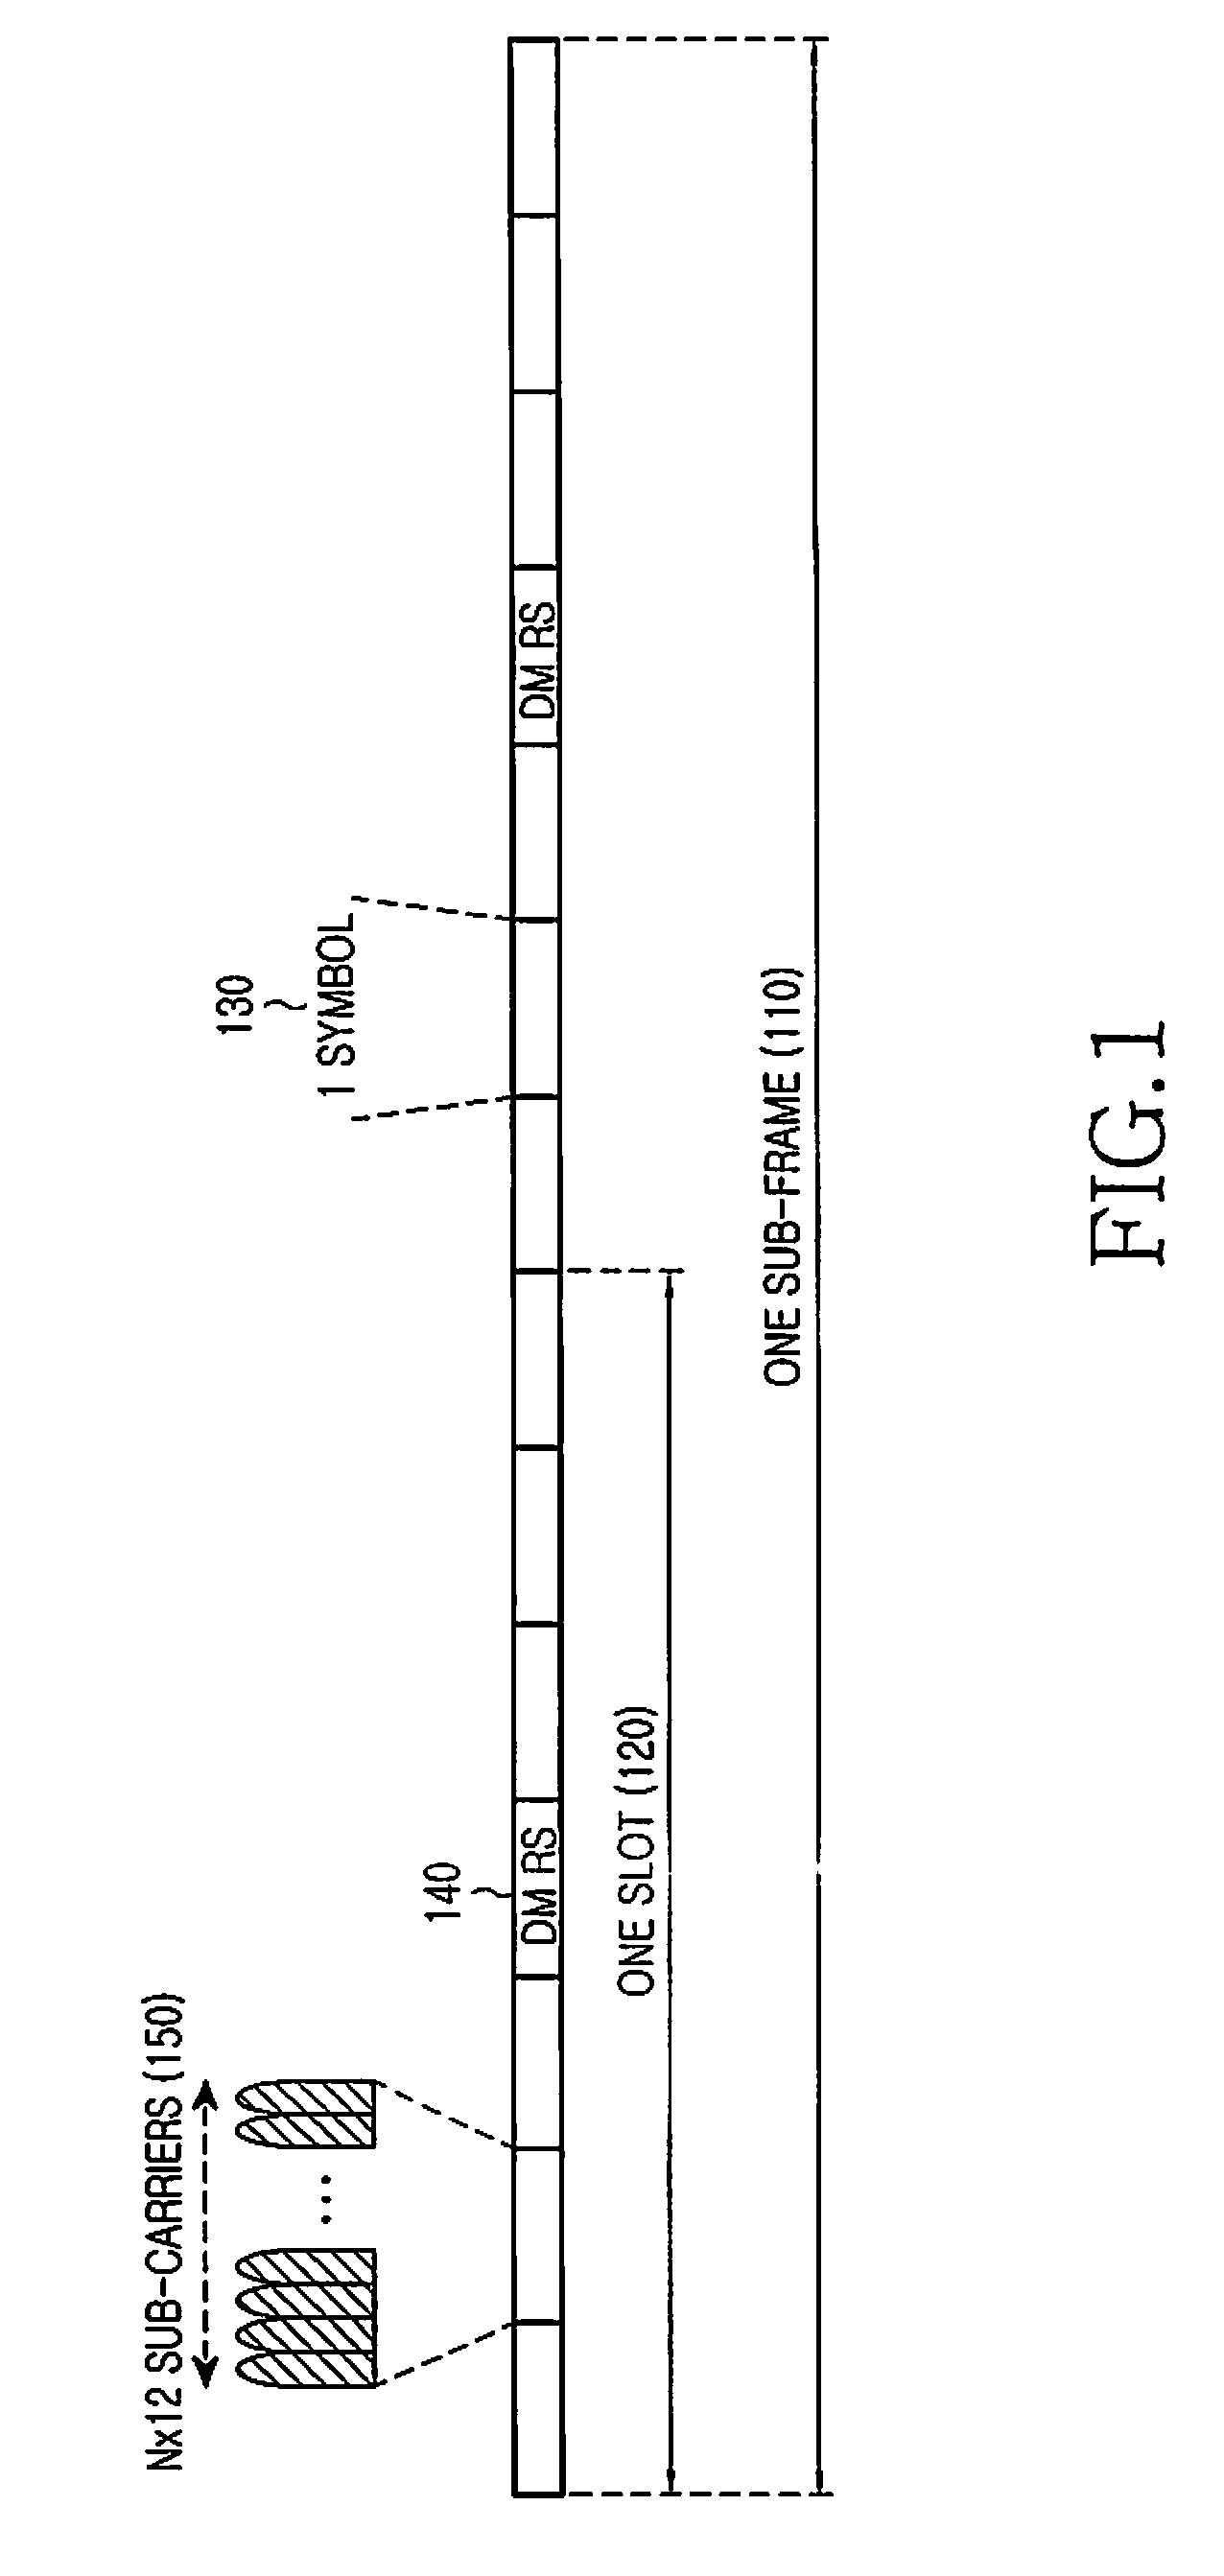 Apparatus and method for supporting transmission of sounding reference signals from multiple antennas